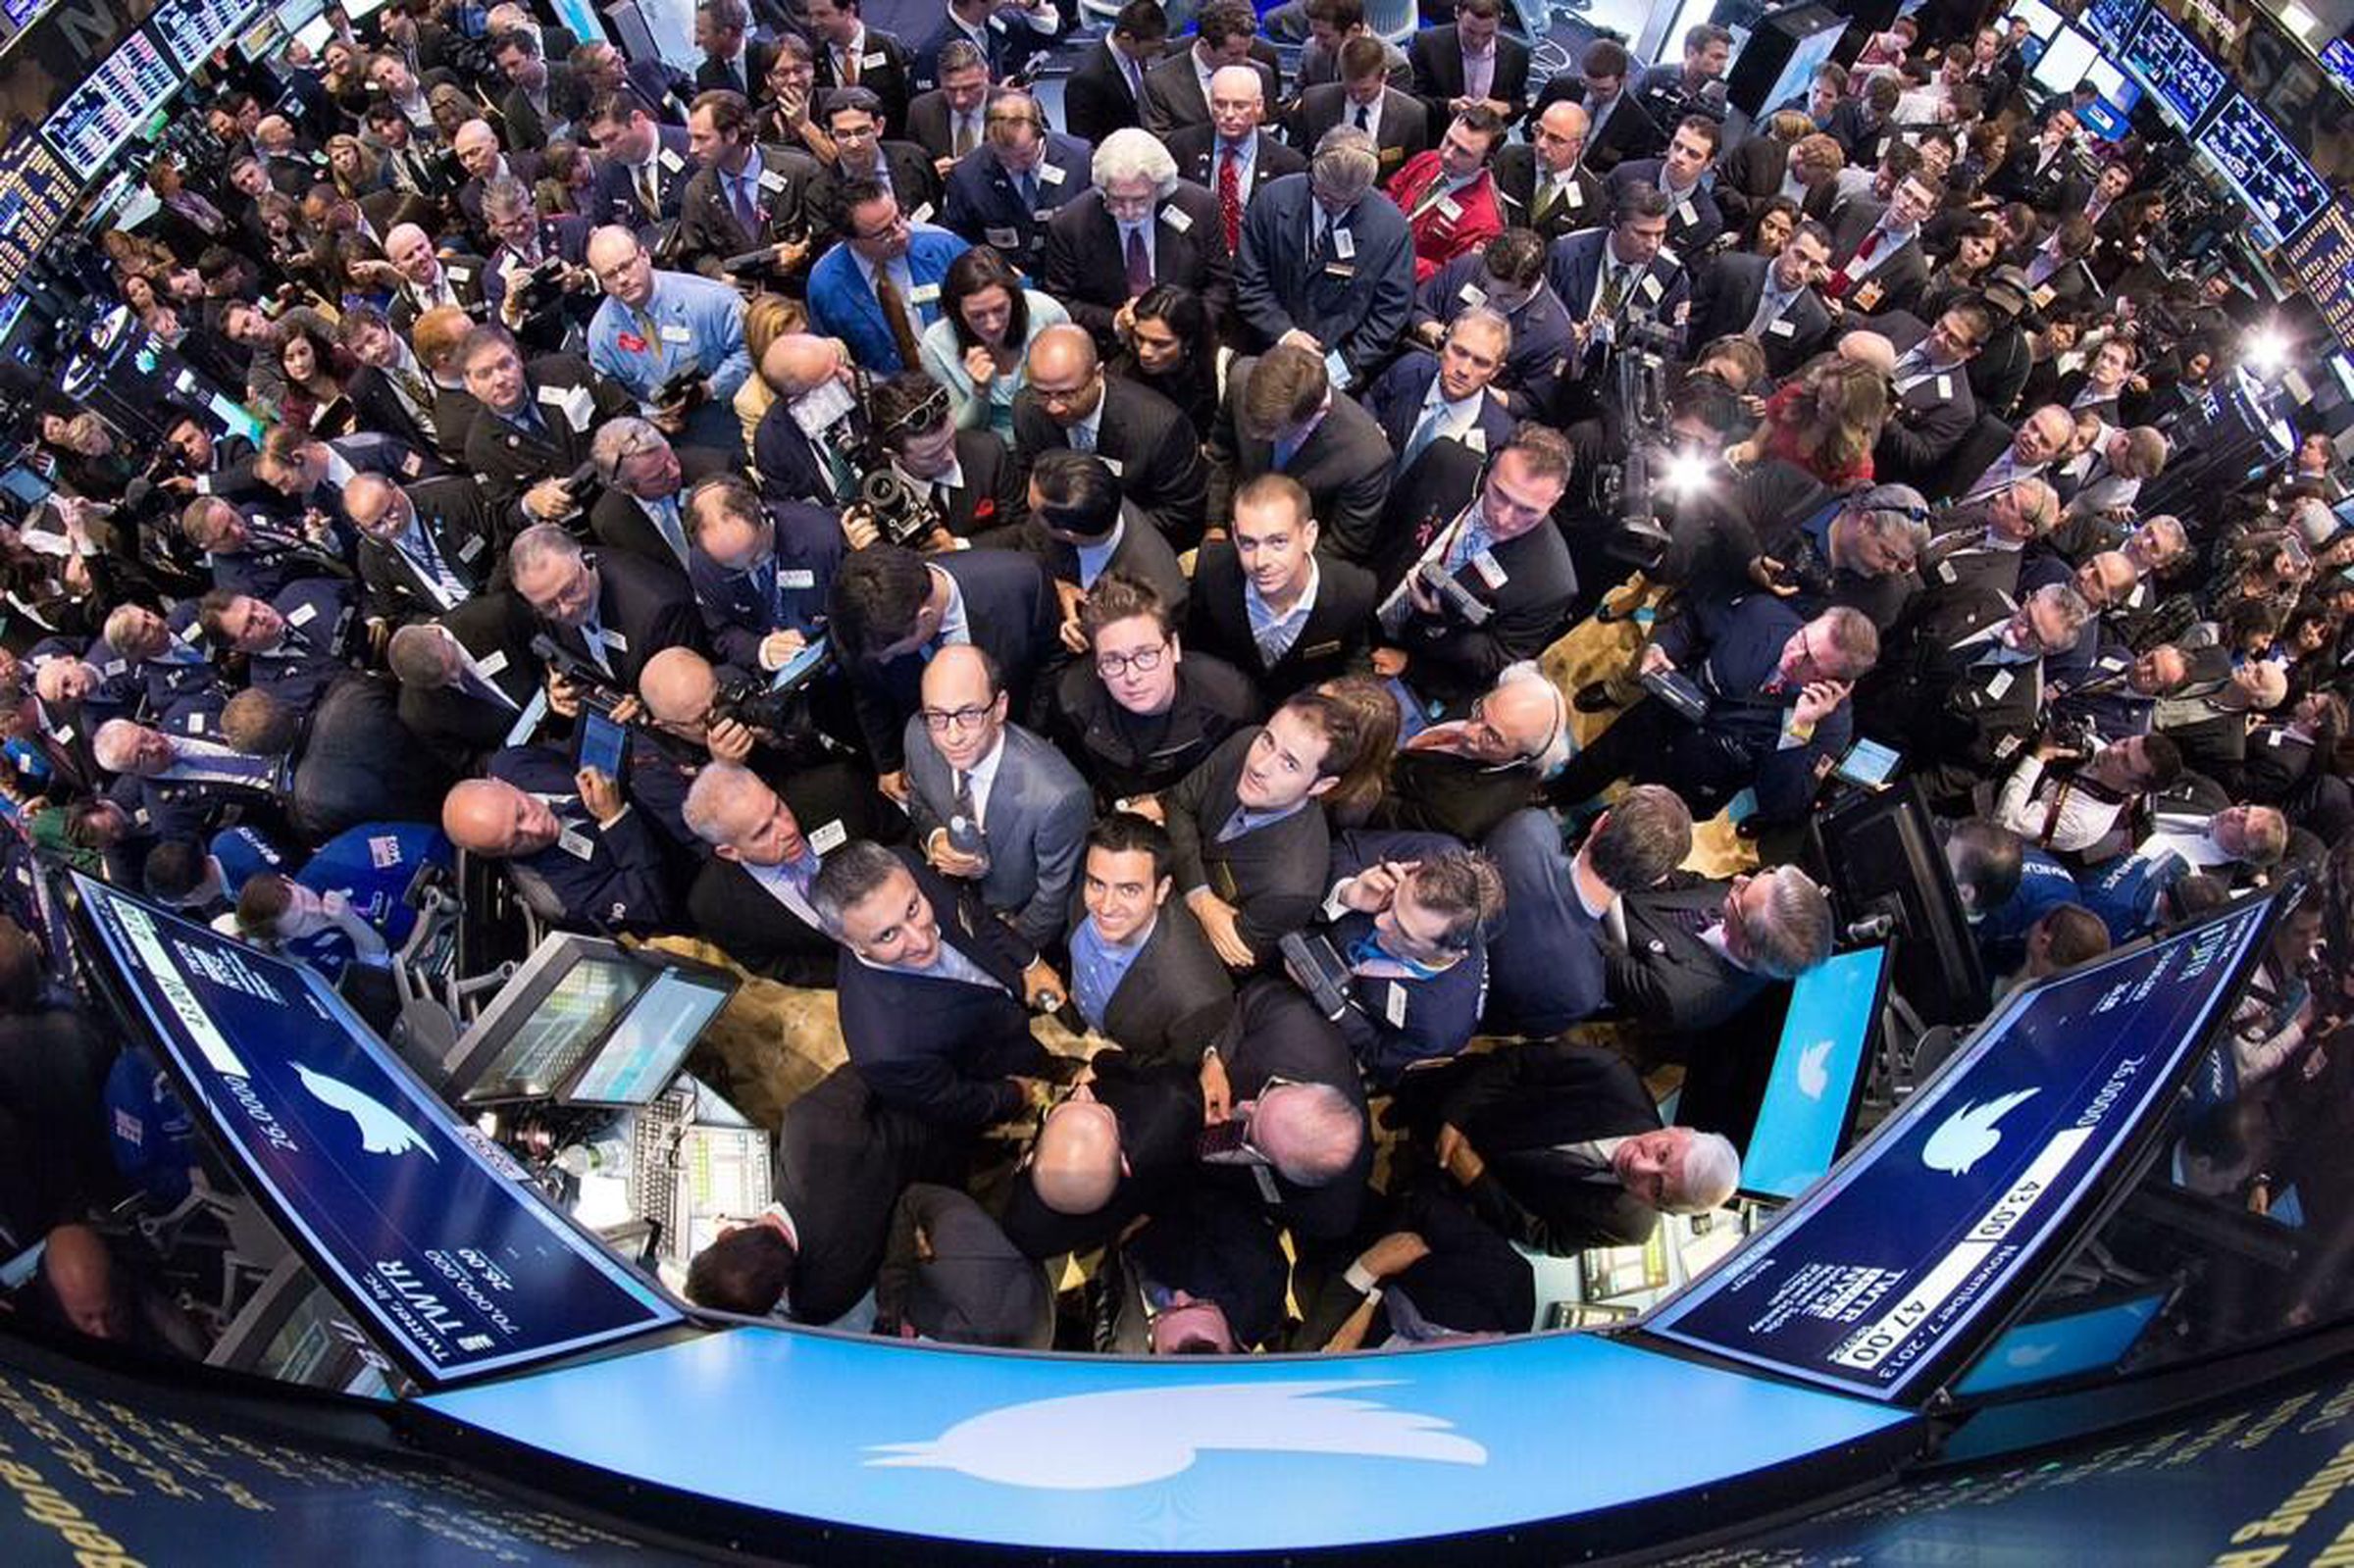 Twitter IPO at The New York Stock Exchange